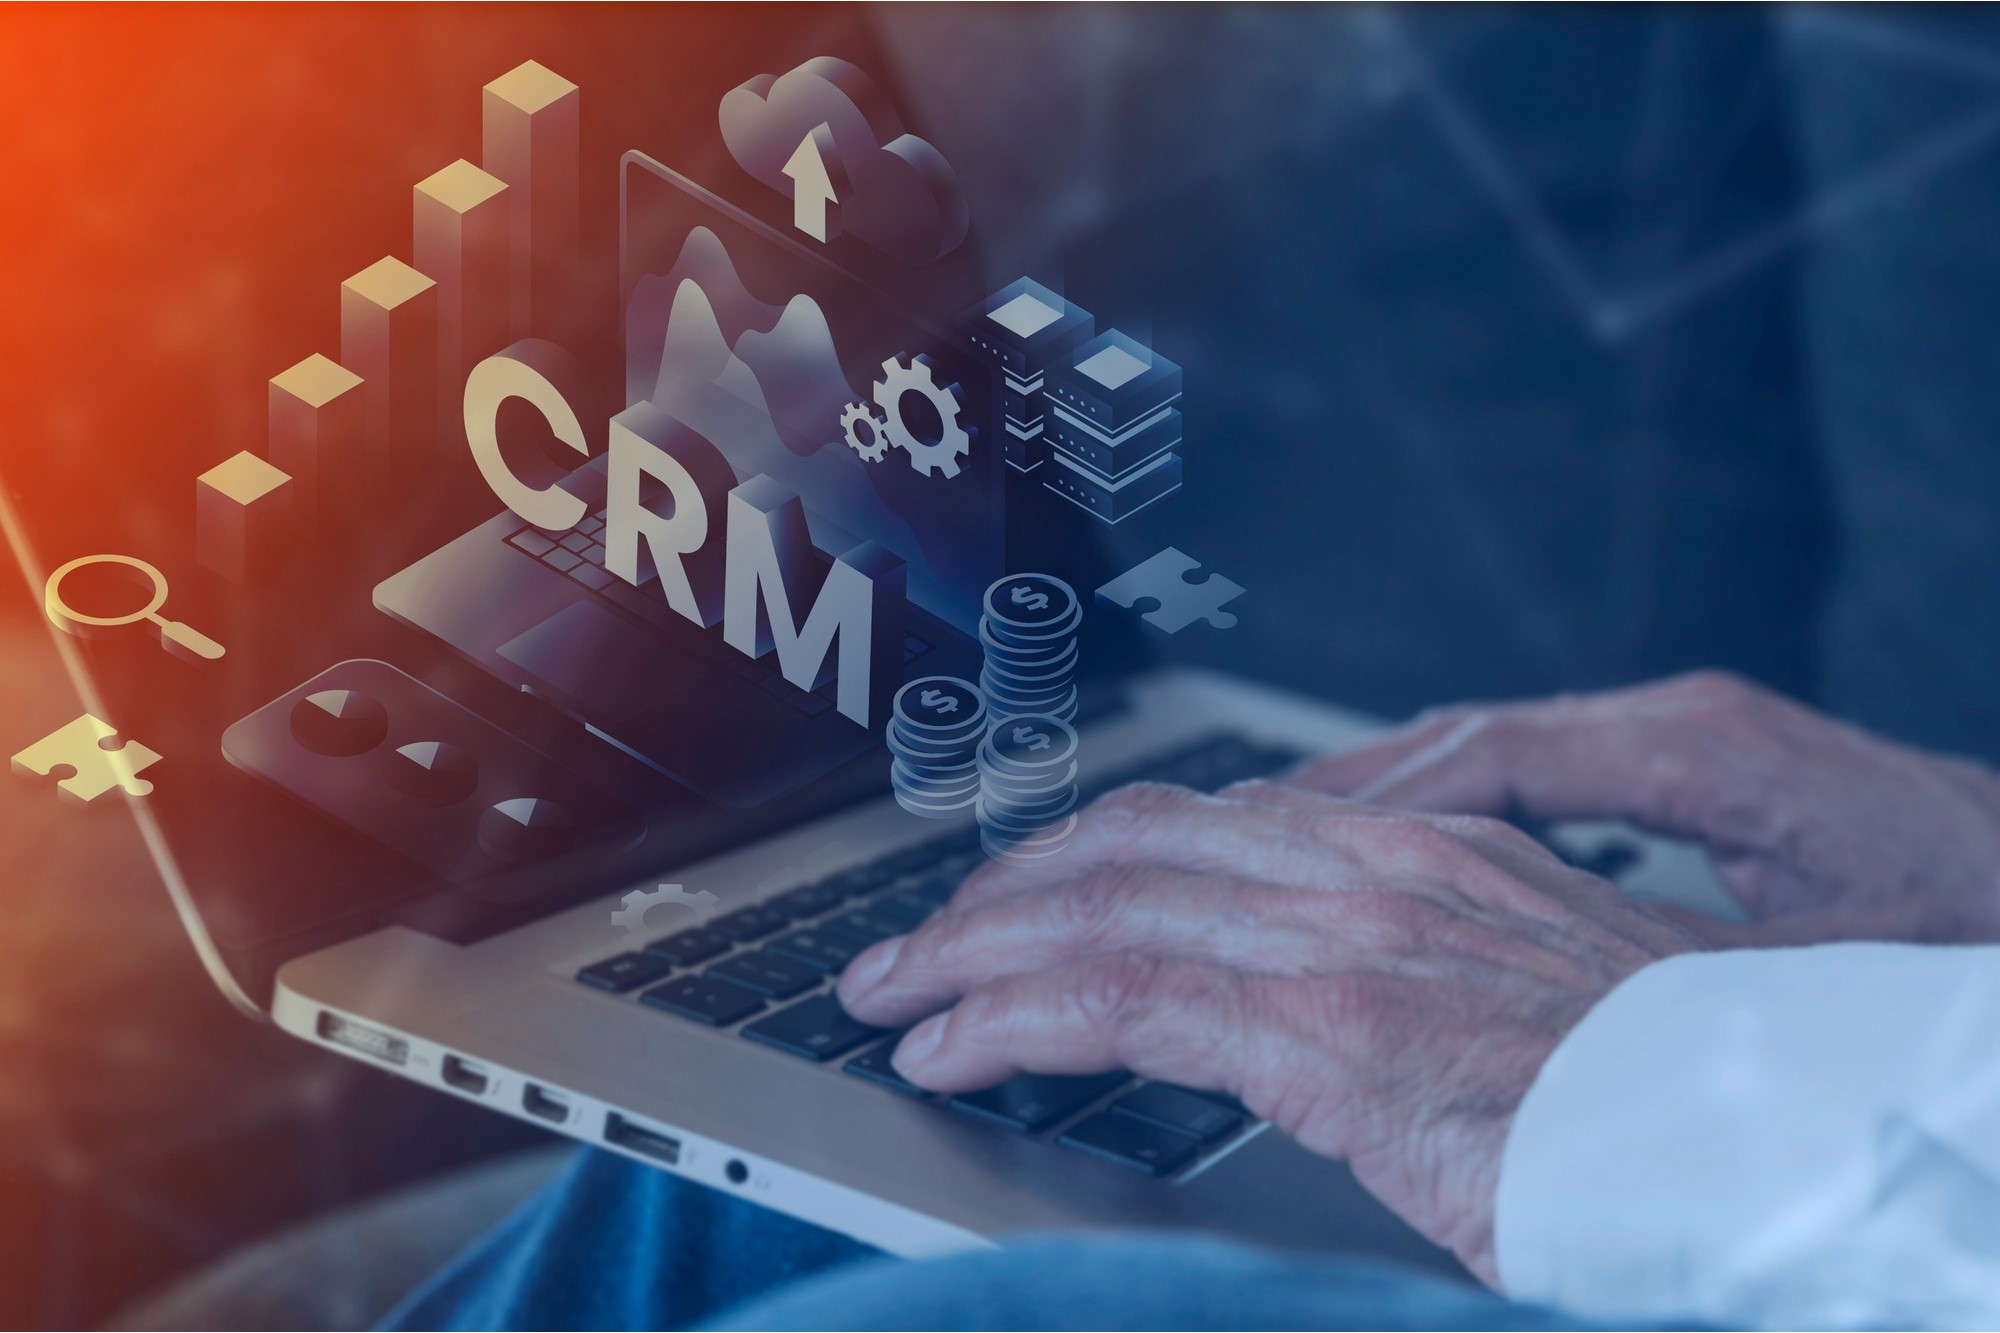  CRM Software